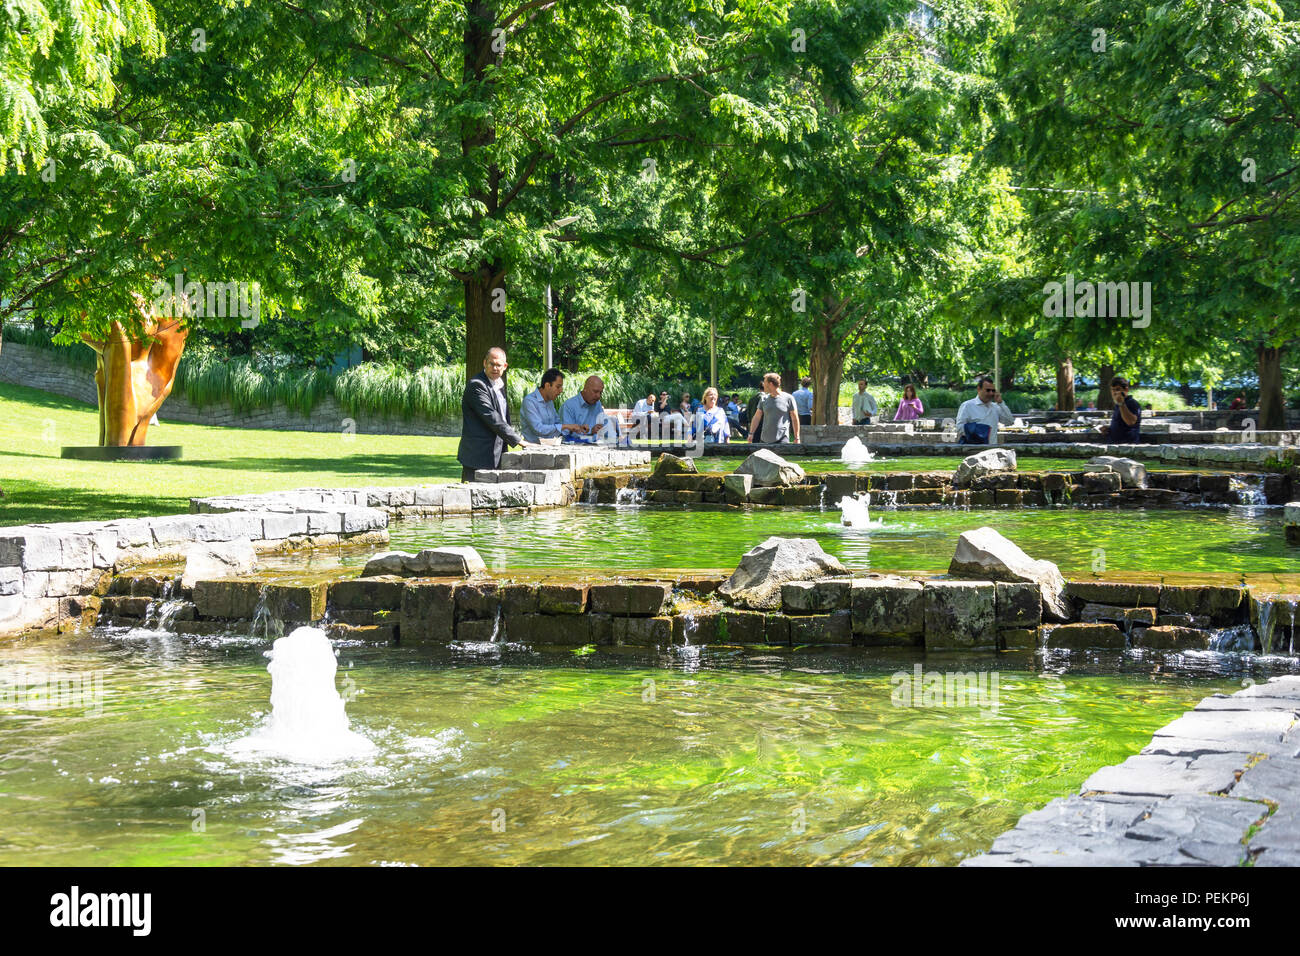 Fountains in Jubilee Park, Canary Wharf, London Borough of Tower Hamlets, London, Greater London, England, United Kingdom Stock Photo